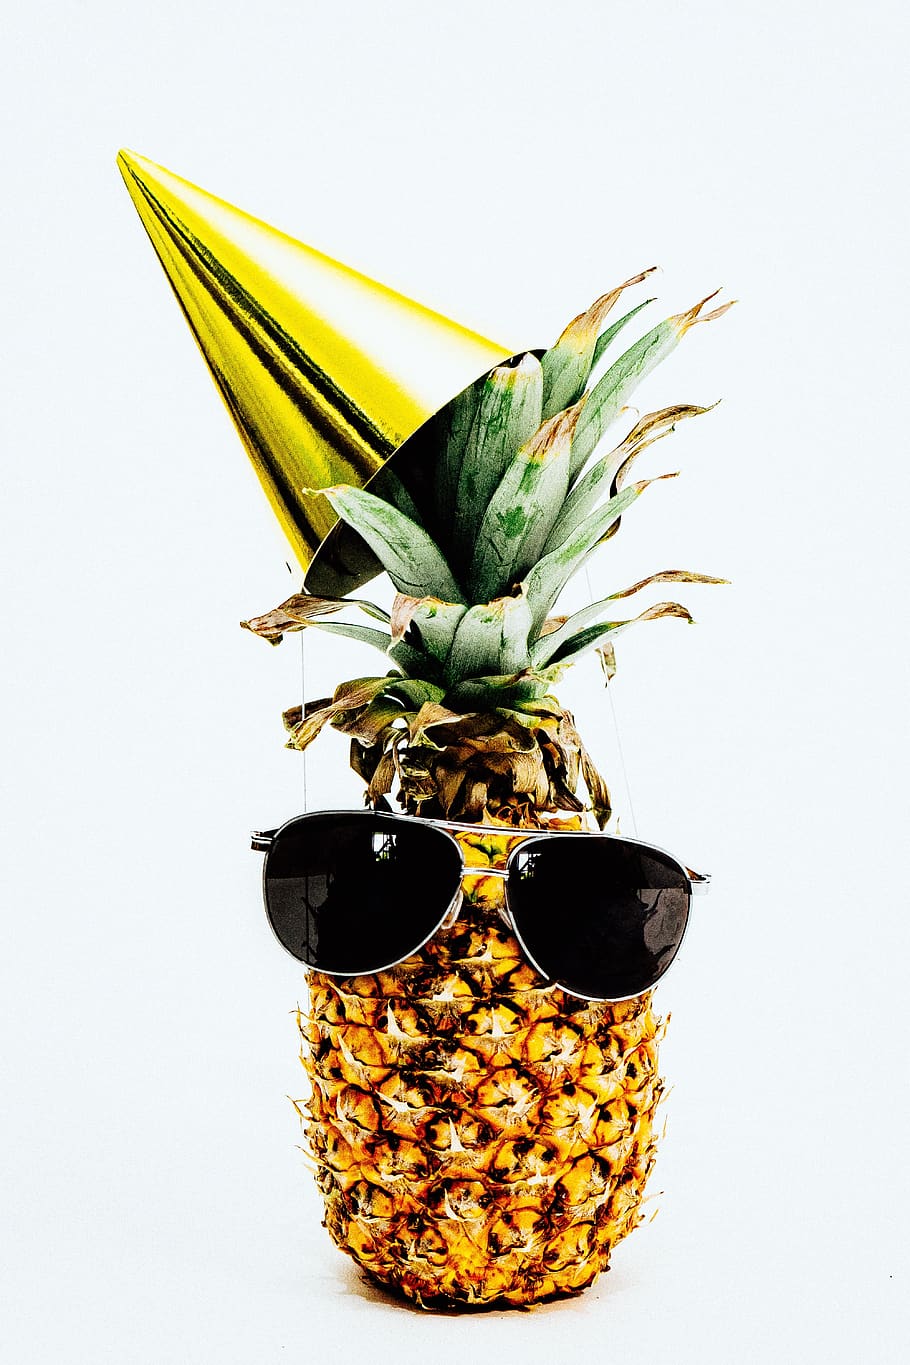 Pineapple, Pineapples, Party Hats, Balloons, Confetti, - HD Wallpaper 